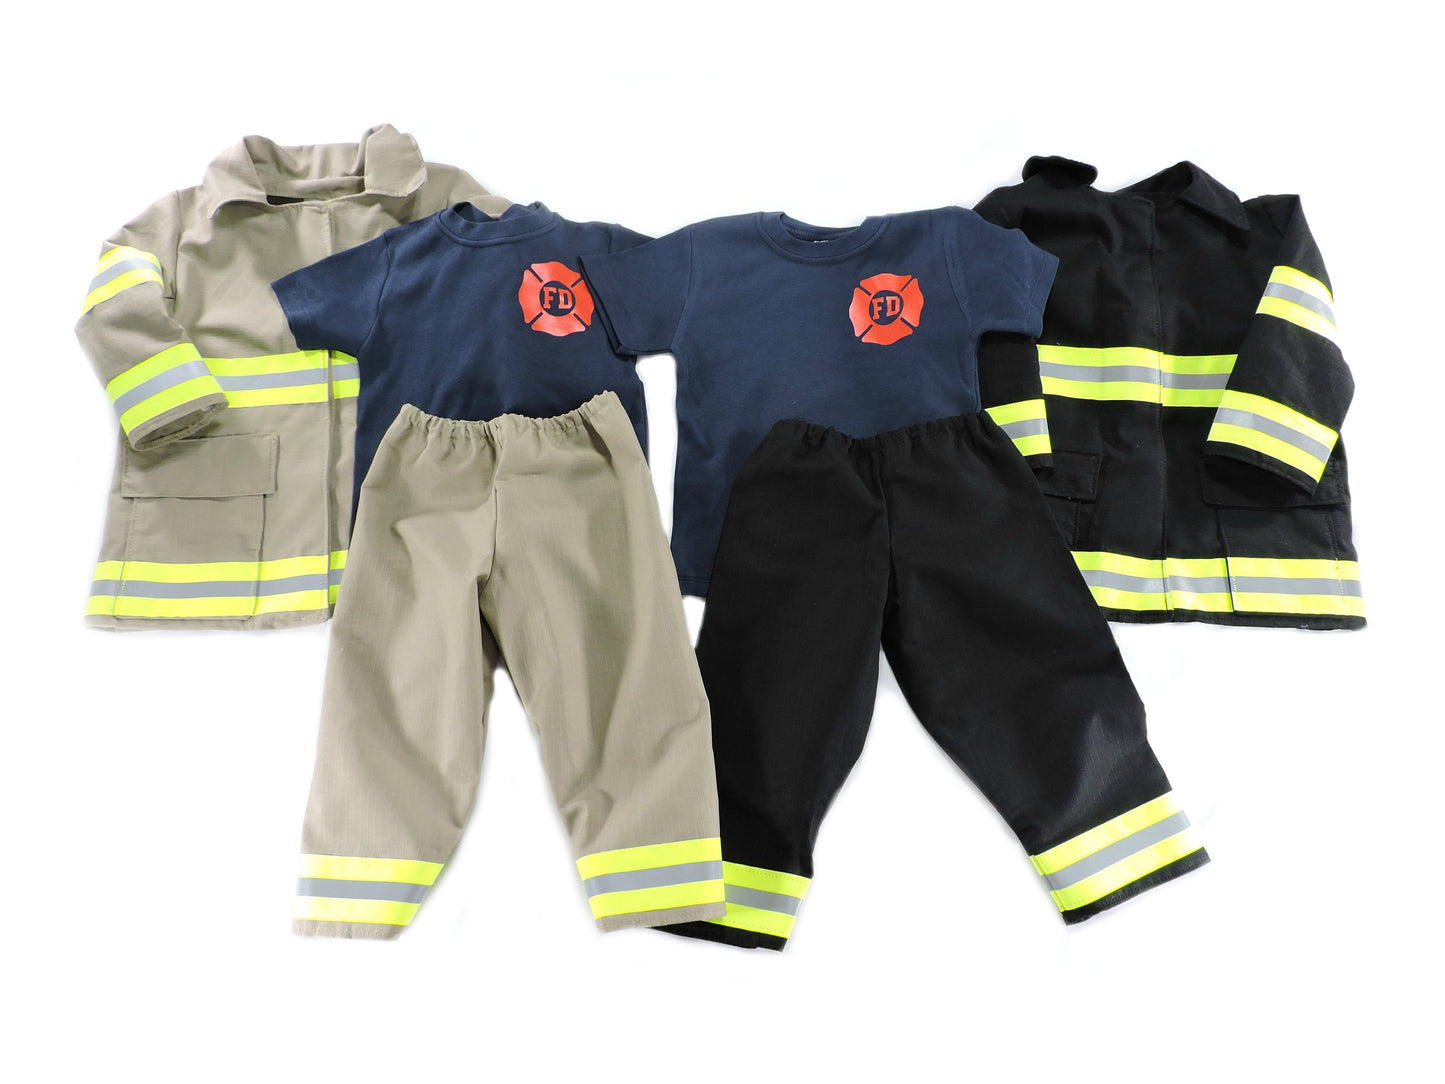 Firefighter toddler boy outfit and jacket